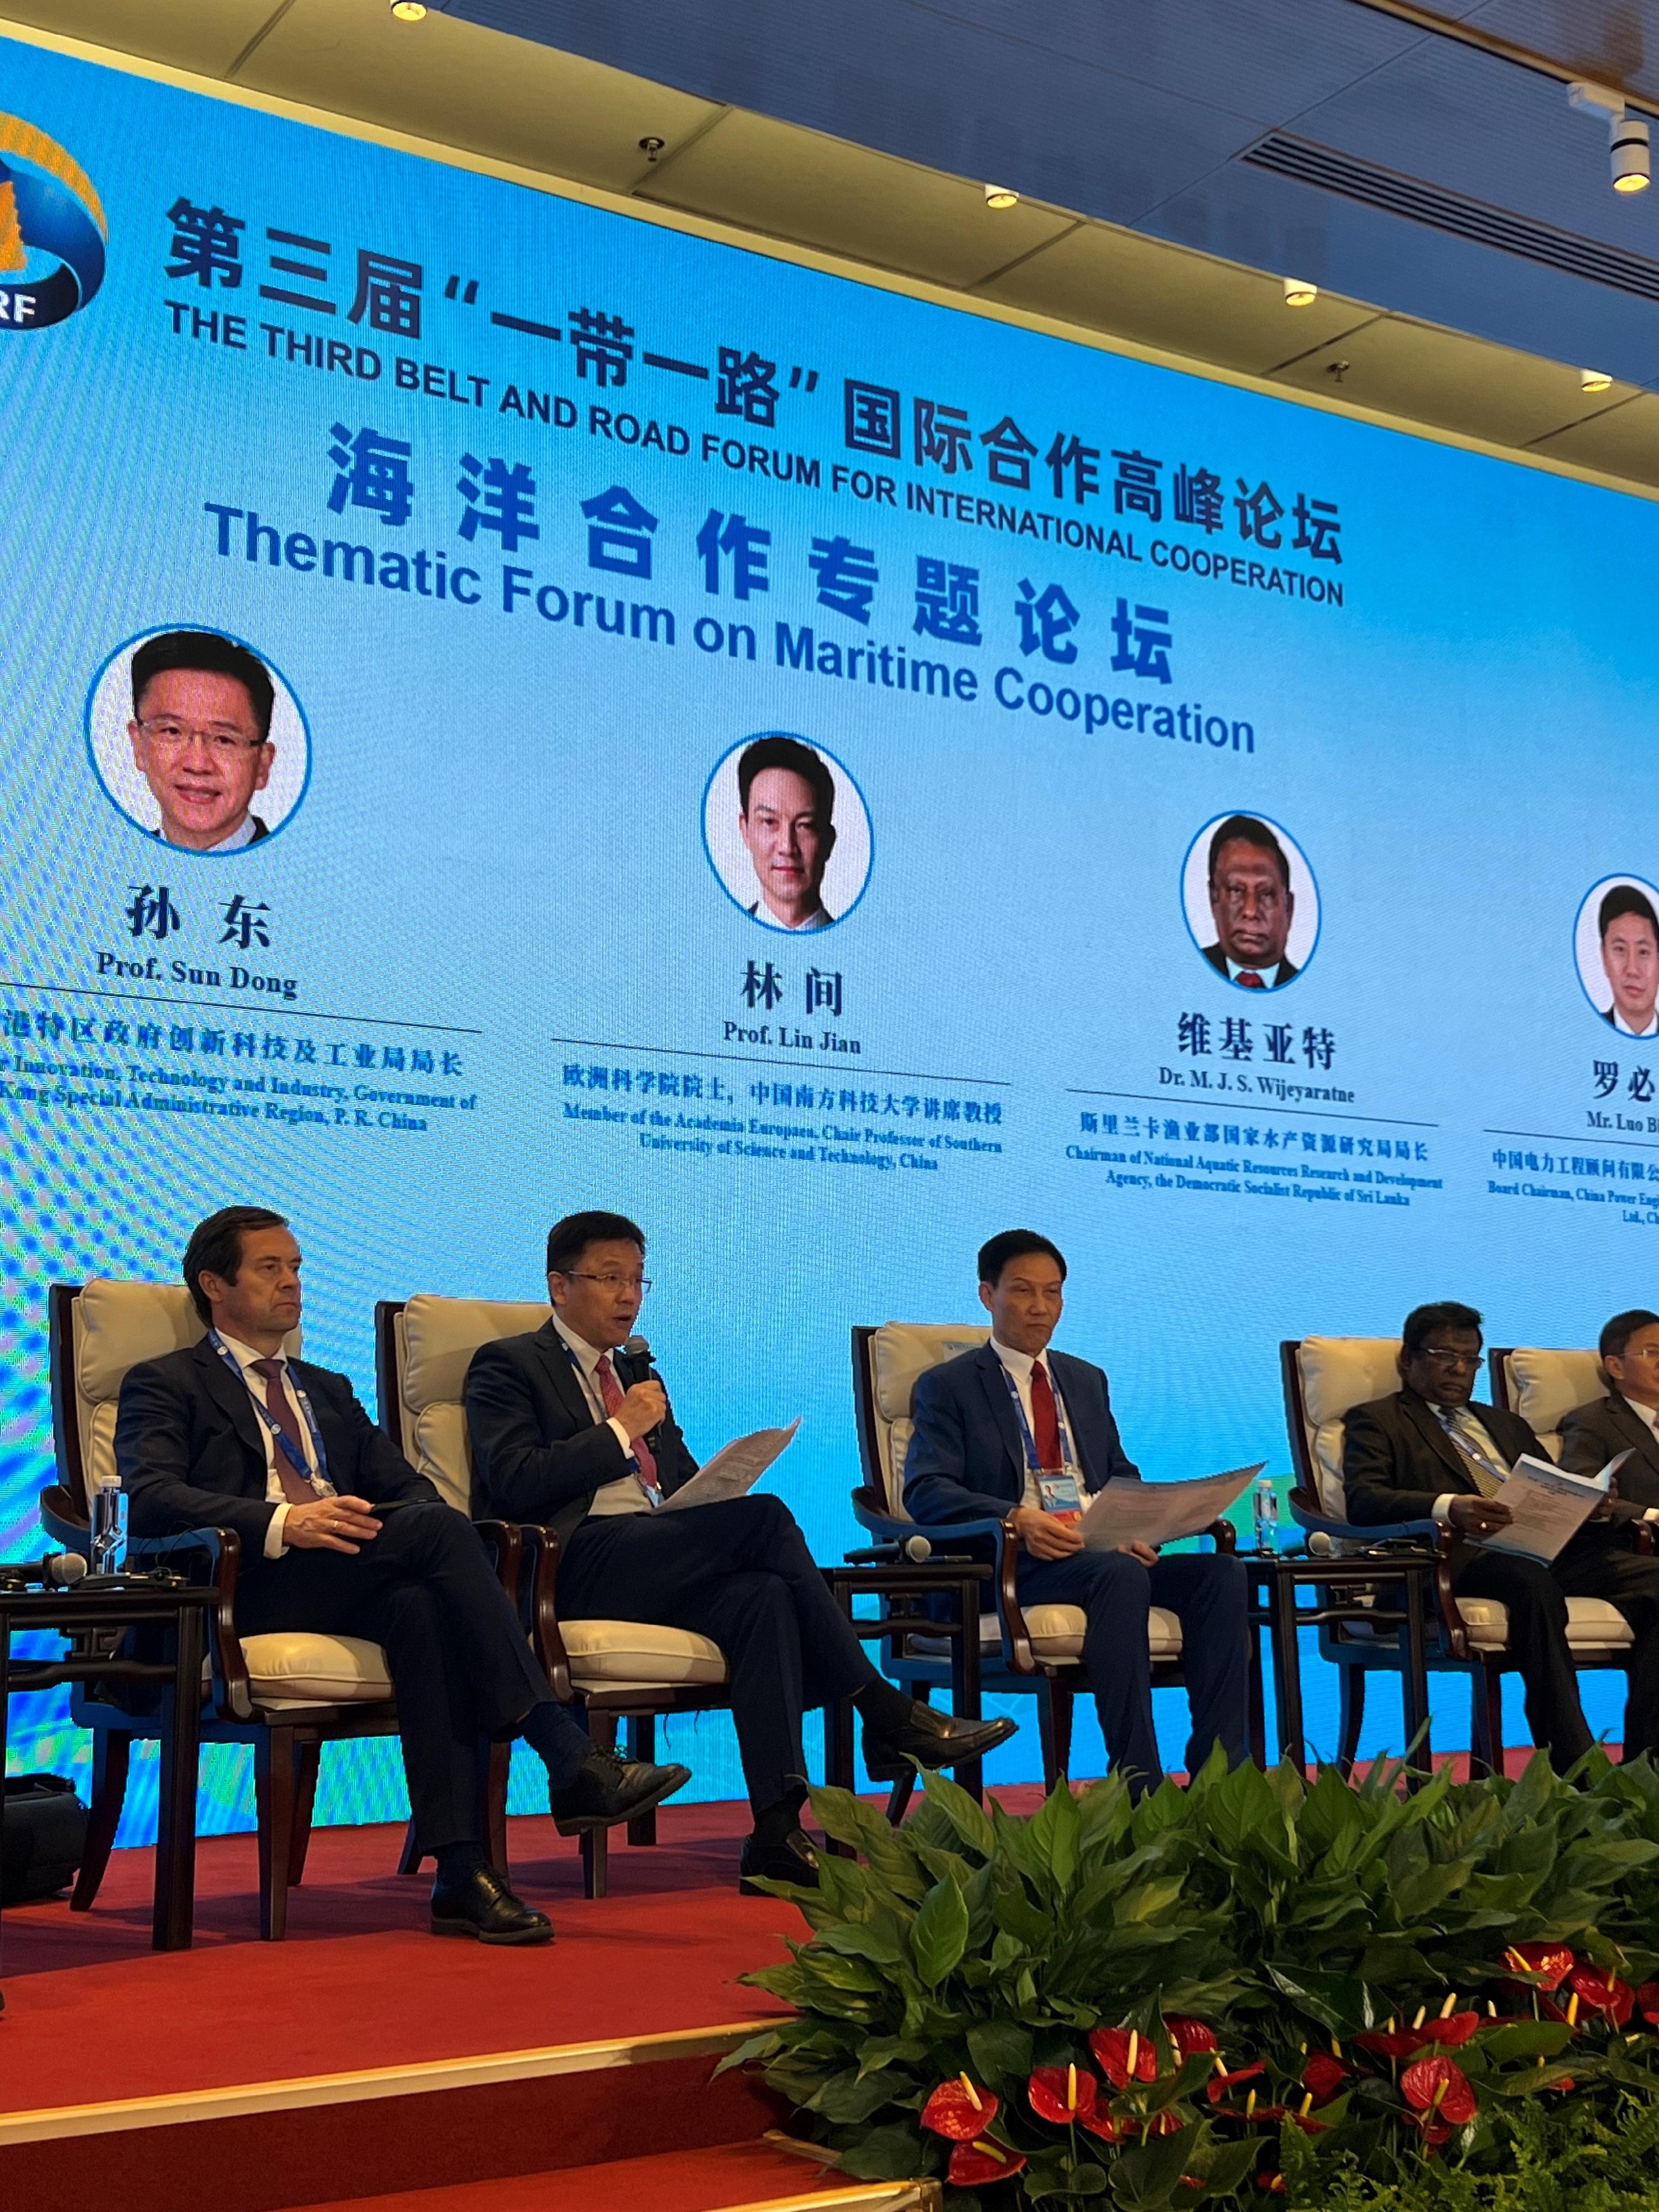 The Secretary for Innovation, Technology and Industry, Professor Sun Dong (second left), speaks at the Thematic Forum on Maritime Cooperation of the third Belt and Road Forum for International Cooperation in Beijing today (October 18).